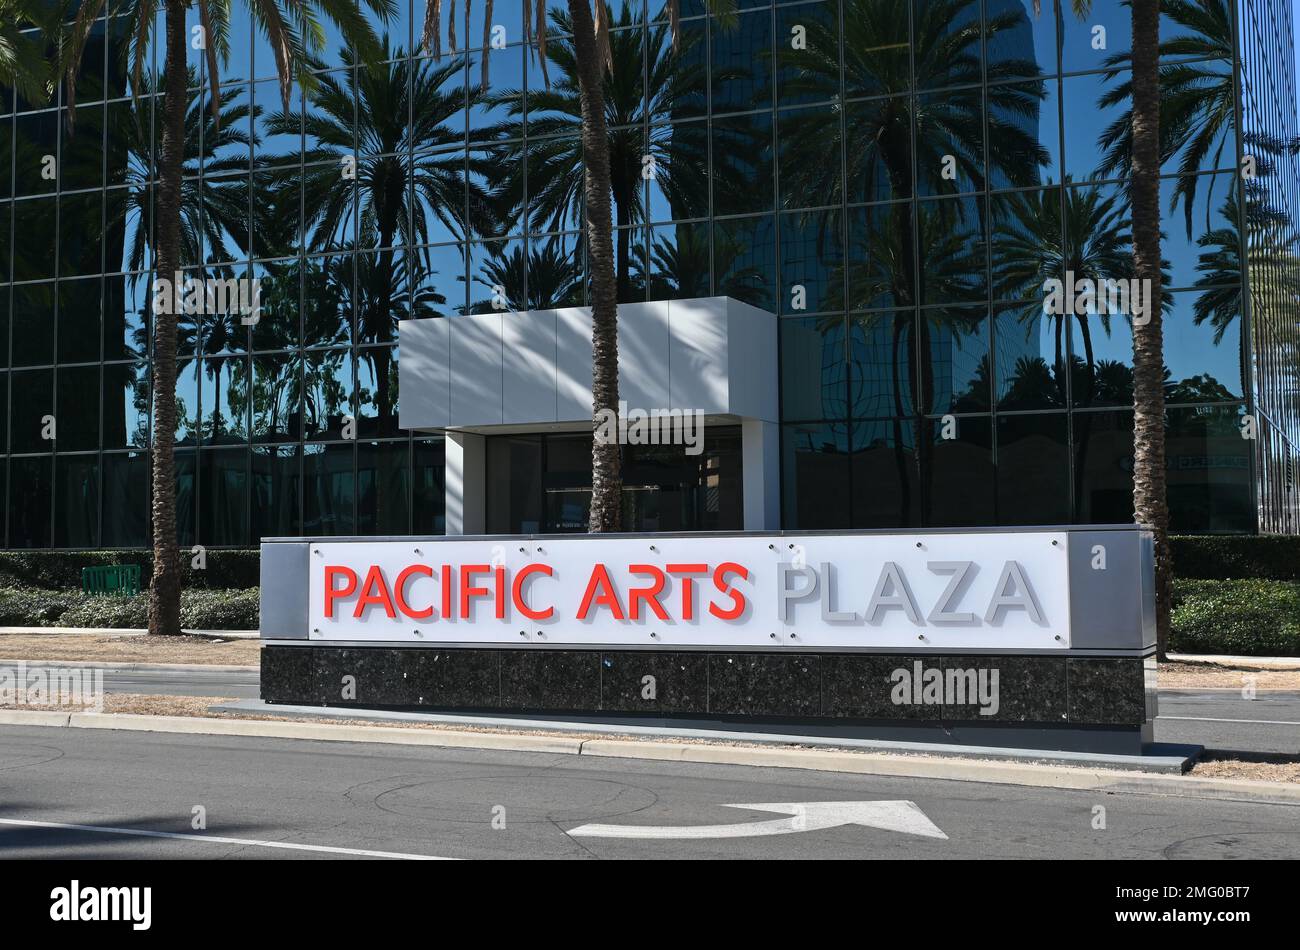 COSTA MESA, CALIFORNIA - 24 JAN 2023: The Pacific Arts Plaza sign at the  Indoor outdoor work and event space with fitness center High Rise buildings, Stock Photo